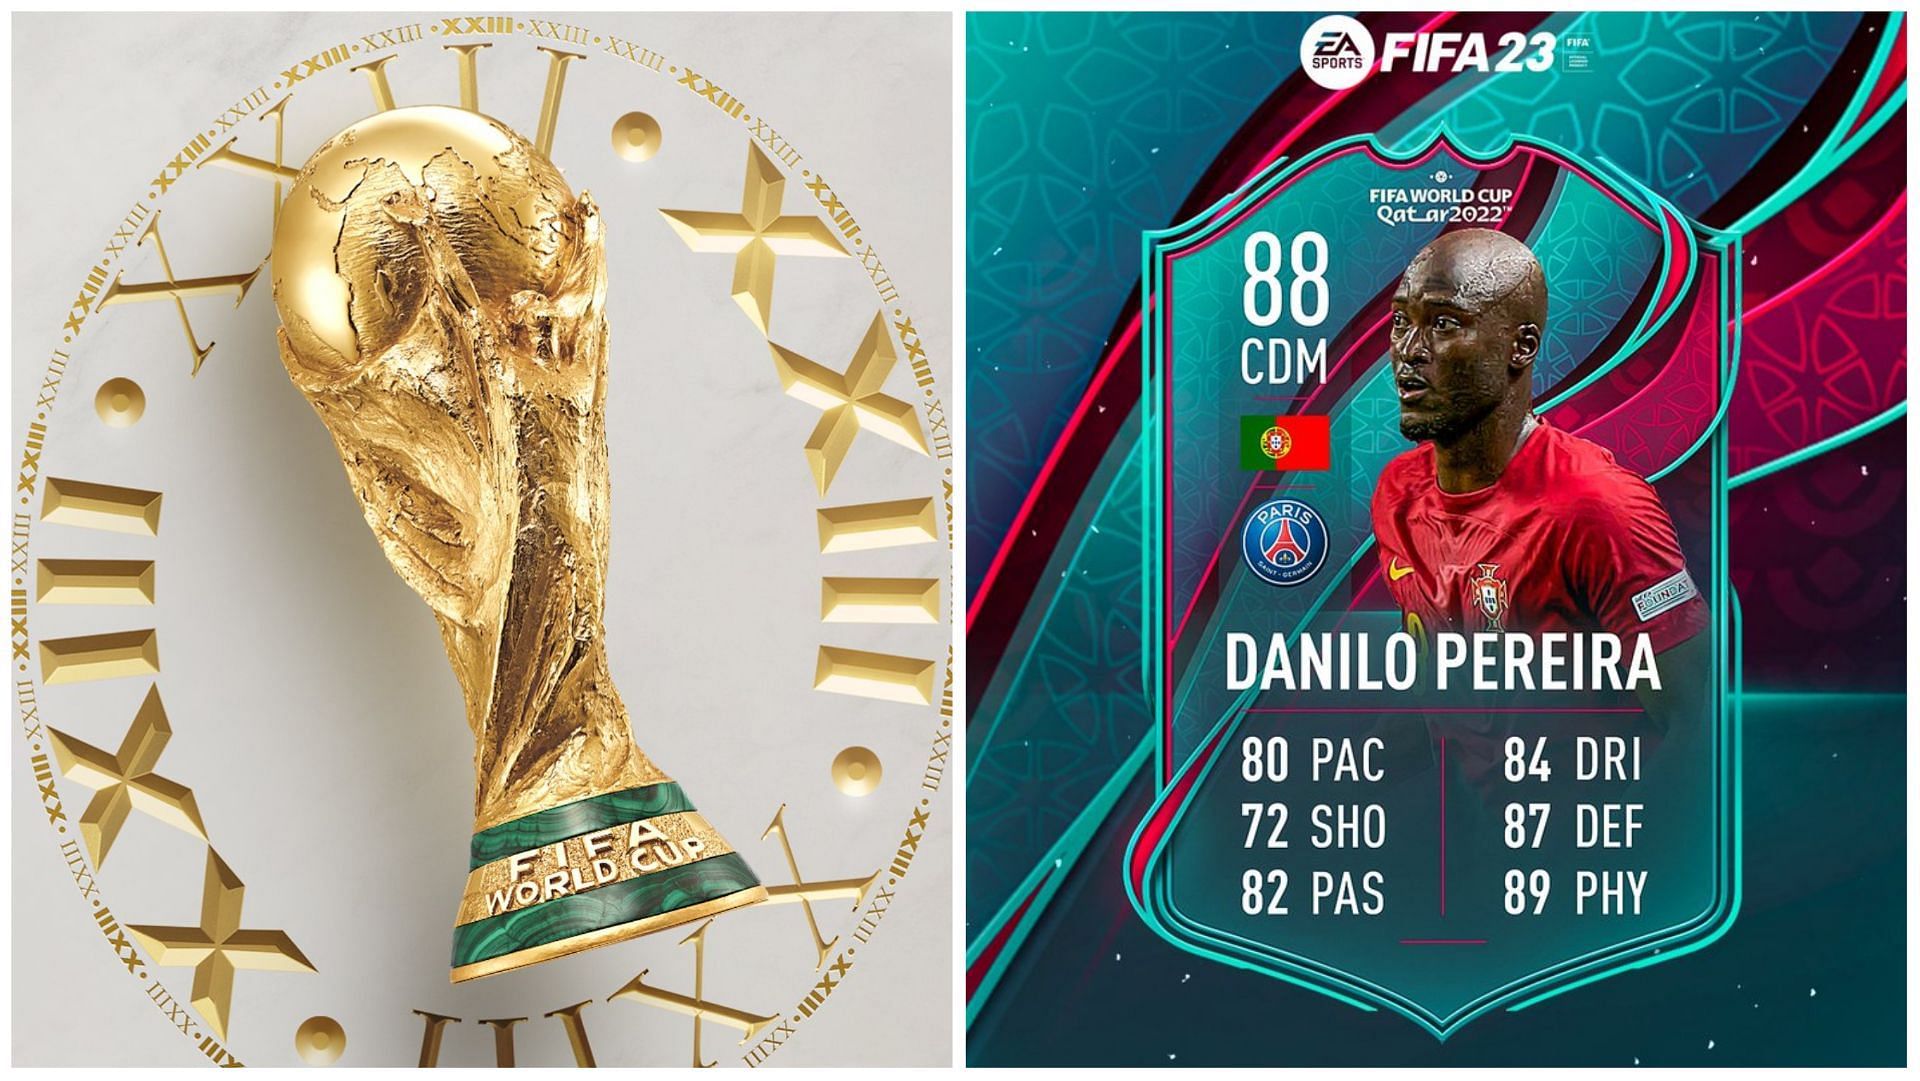 Danilo Pereira will receive a special card in FIFA 23 (Images via FIFA and Twitter/FUT Sheriff)